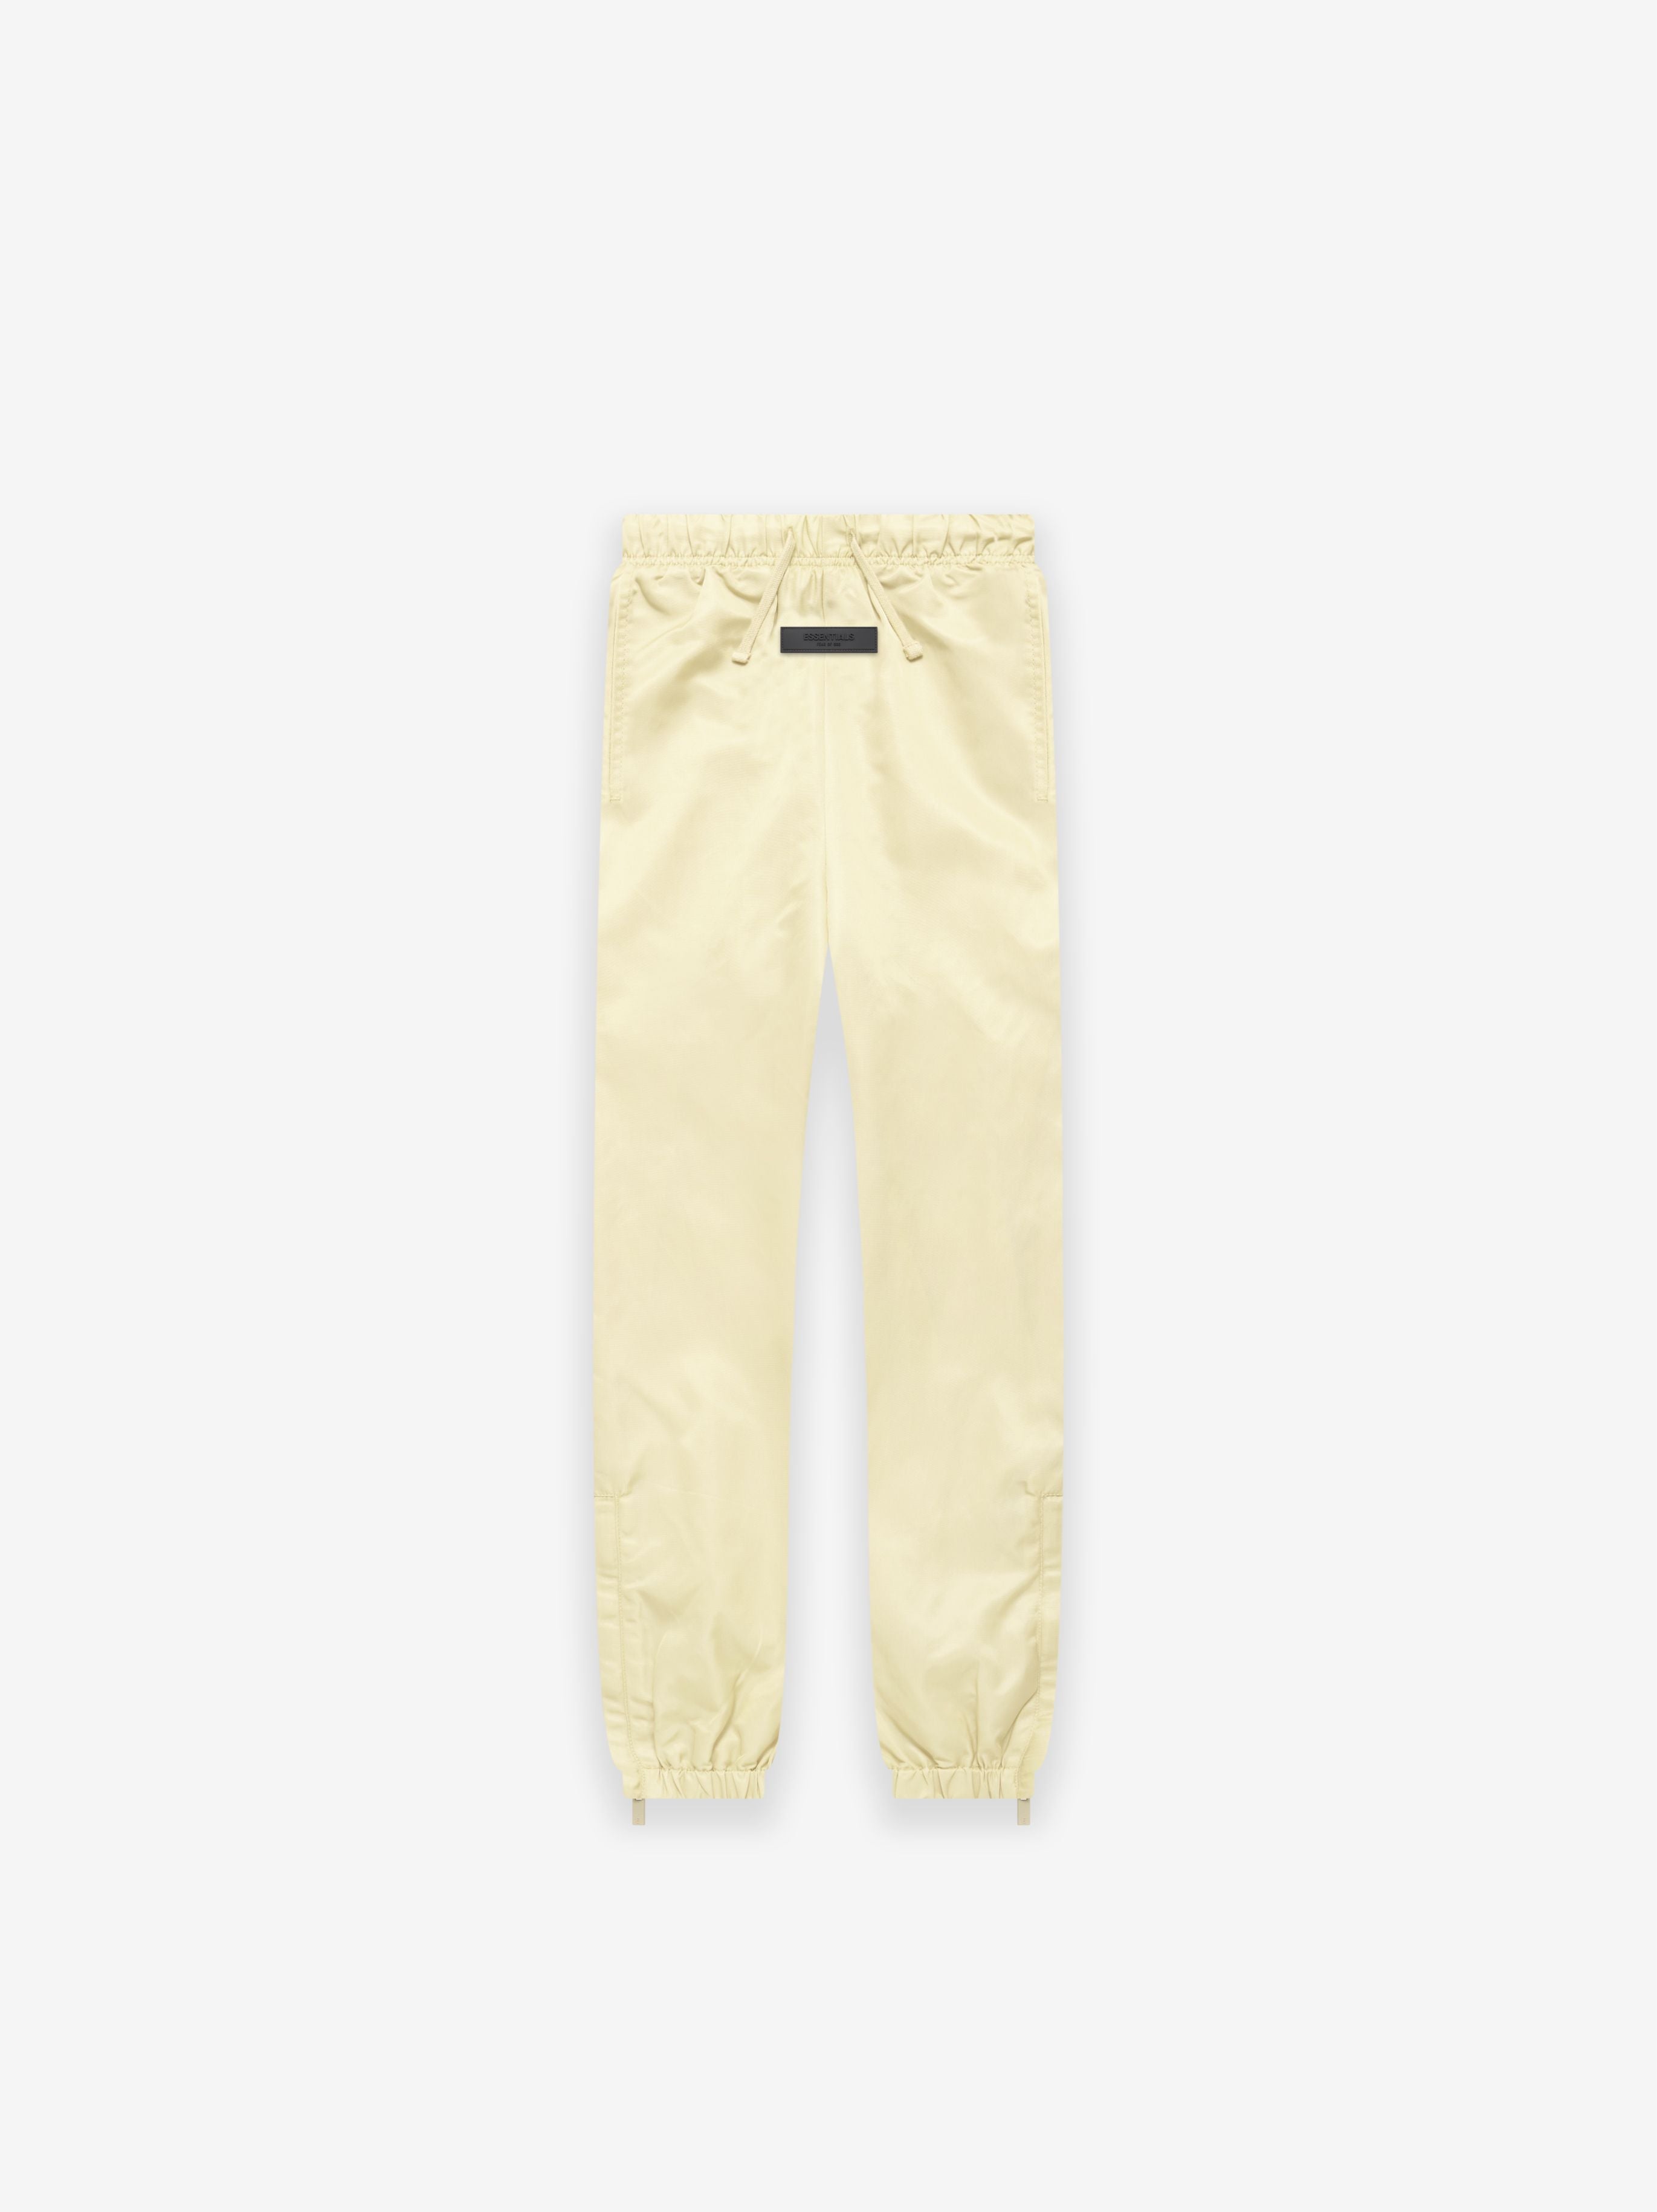 ESSENTIALS Kids Track Pant in Canary | Fear of God